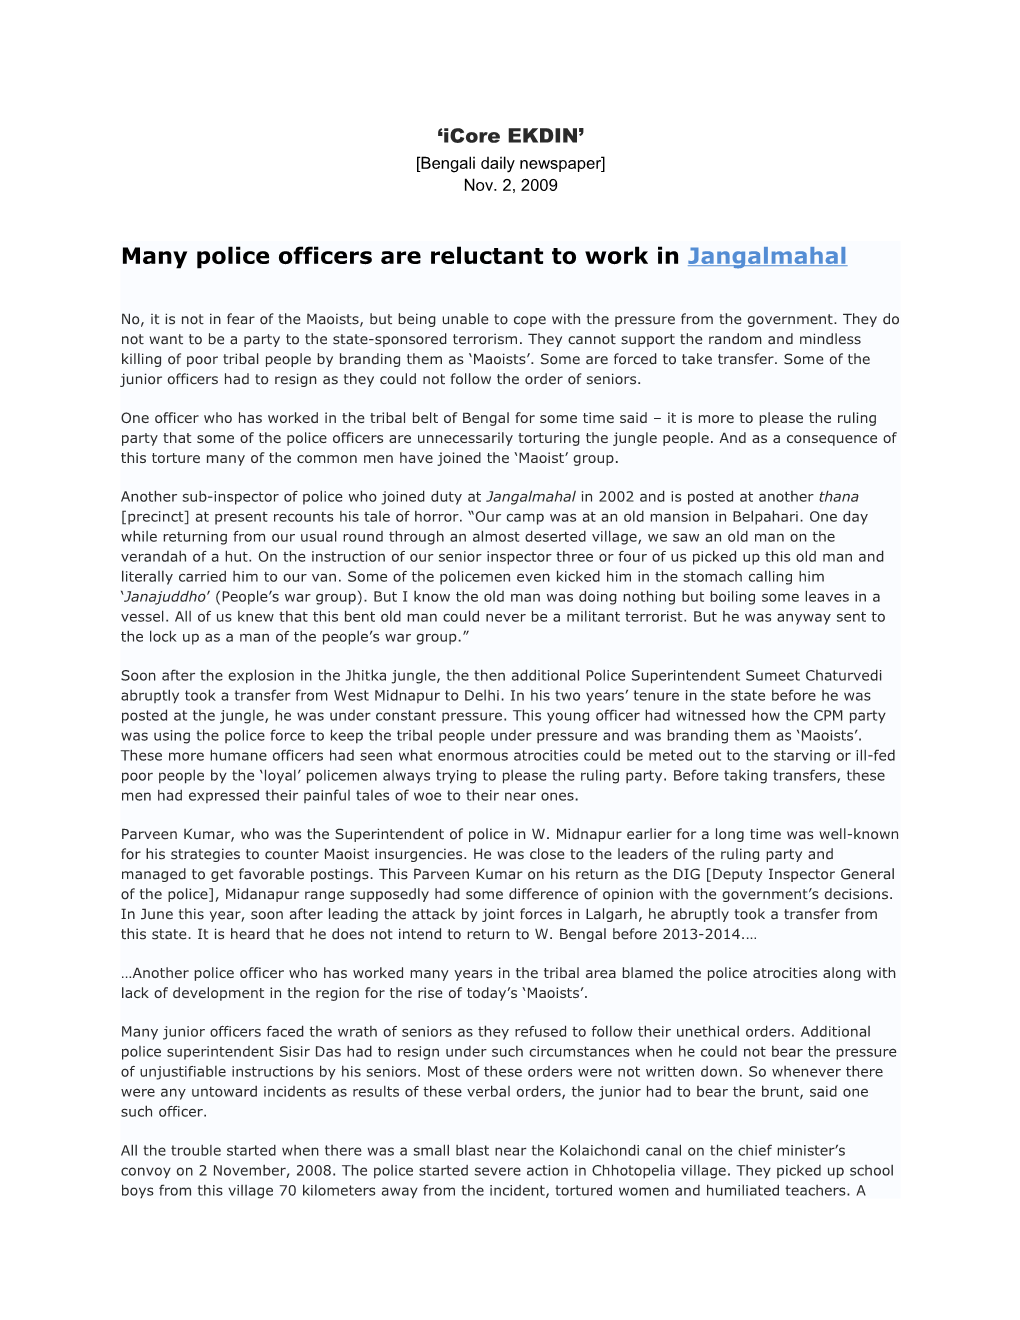 Many Police Officers Are Reluctant to Work in Jangalmahal